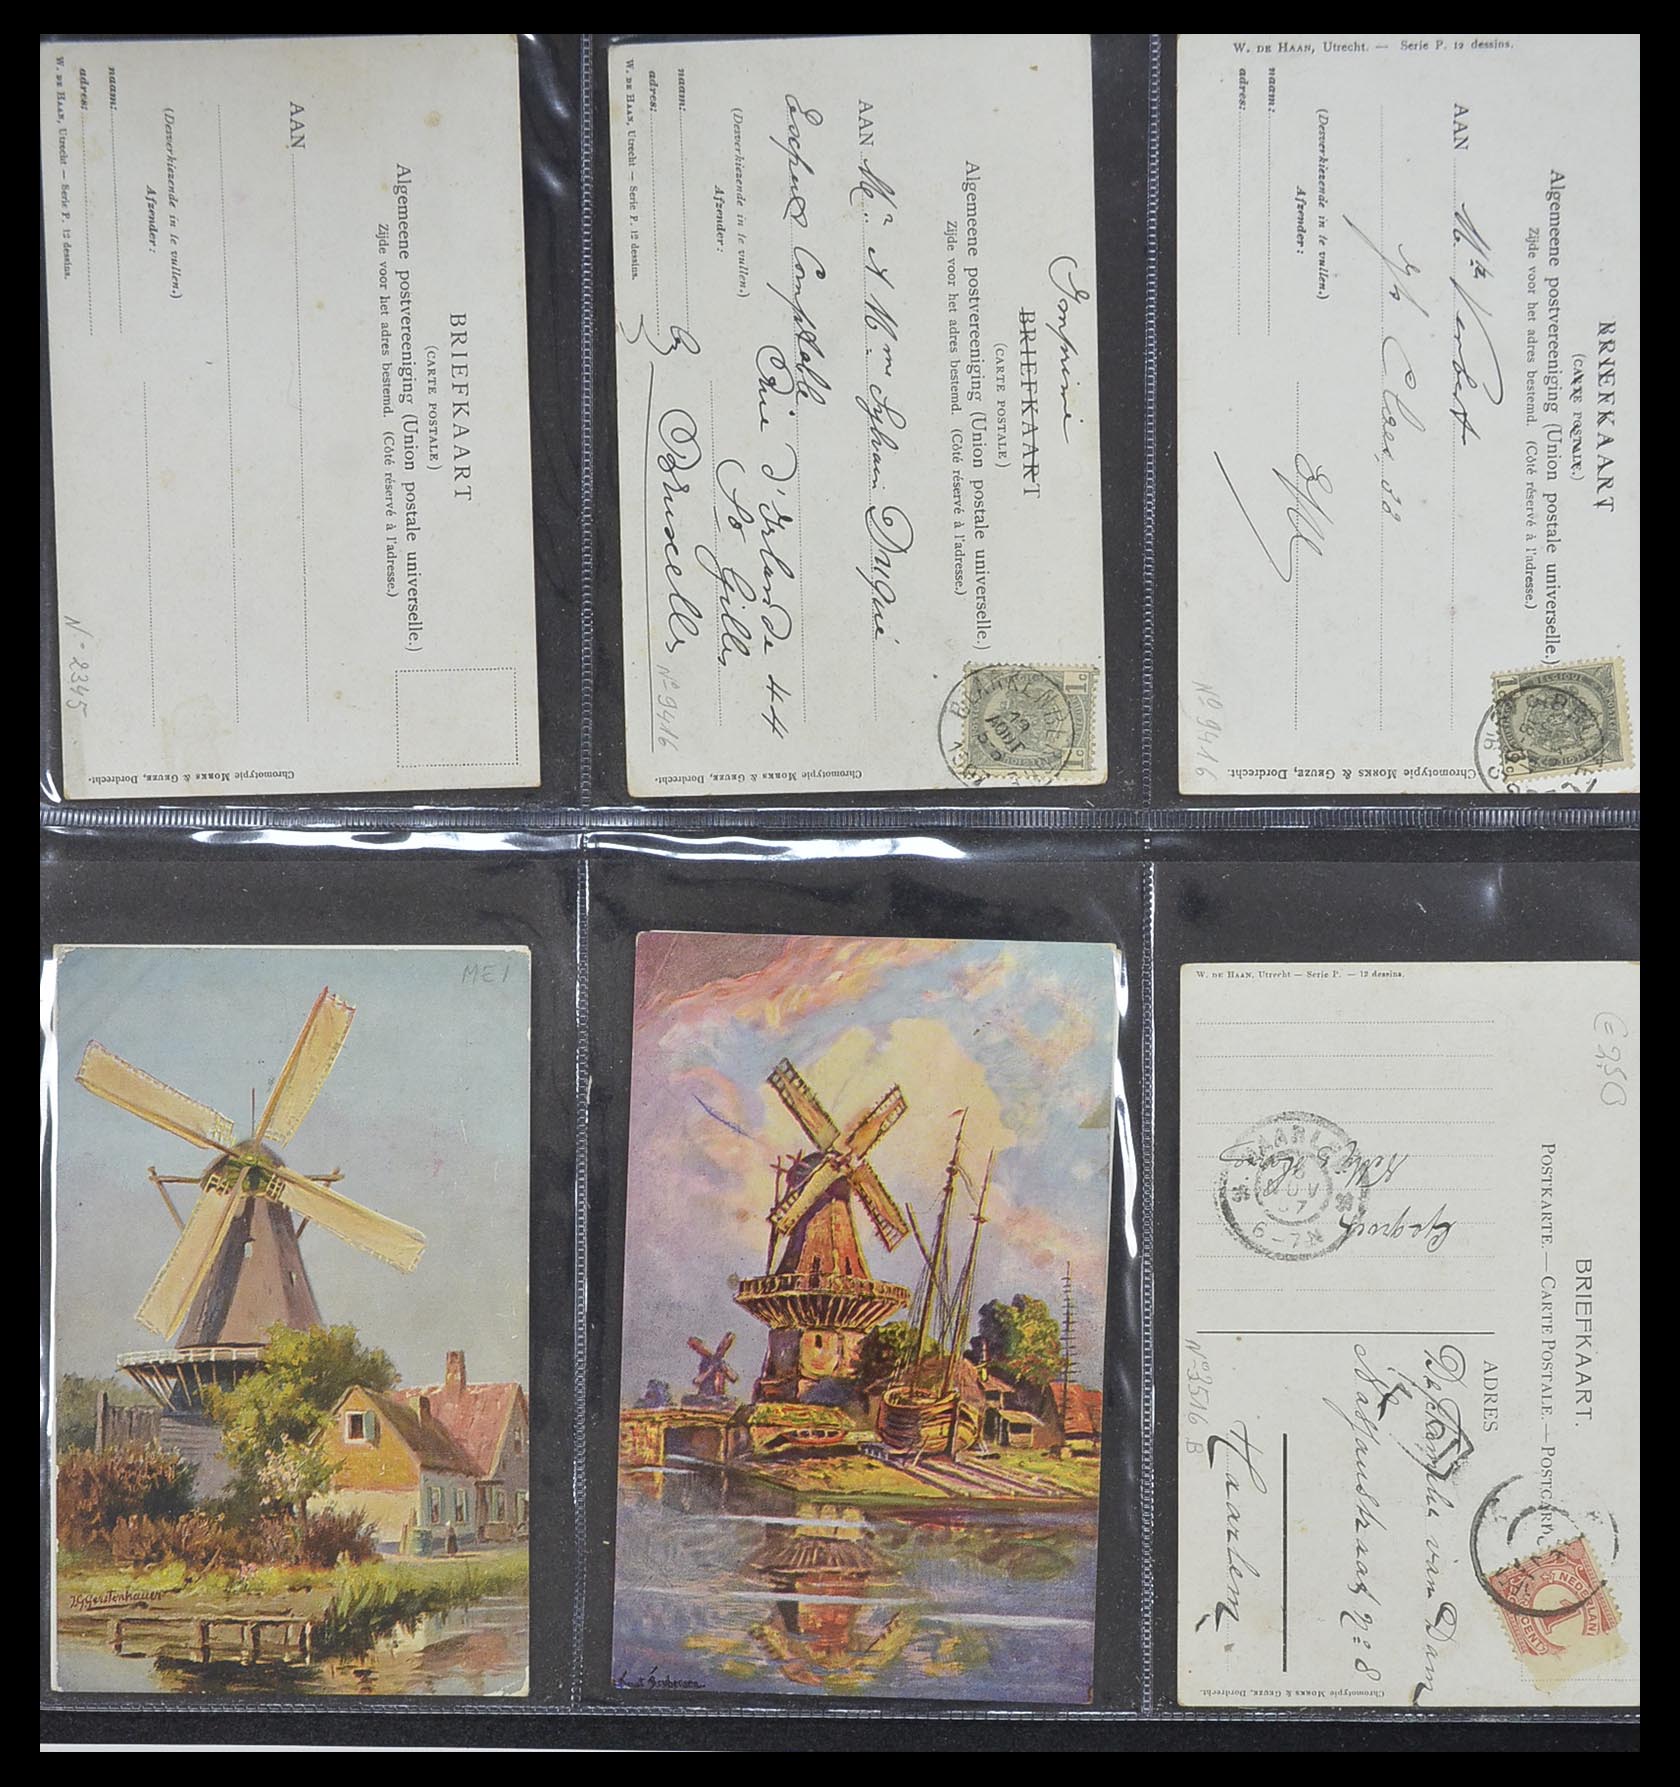 33928 094 - Stamp collection 33928 Netherlands picture postcards 1910-1930.